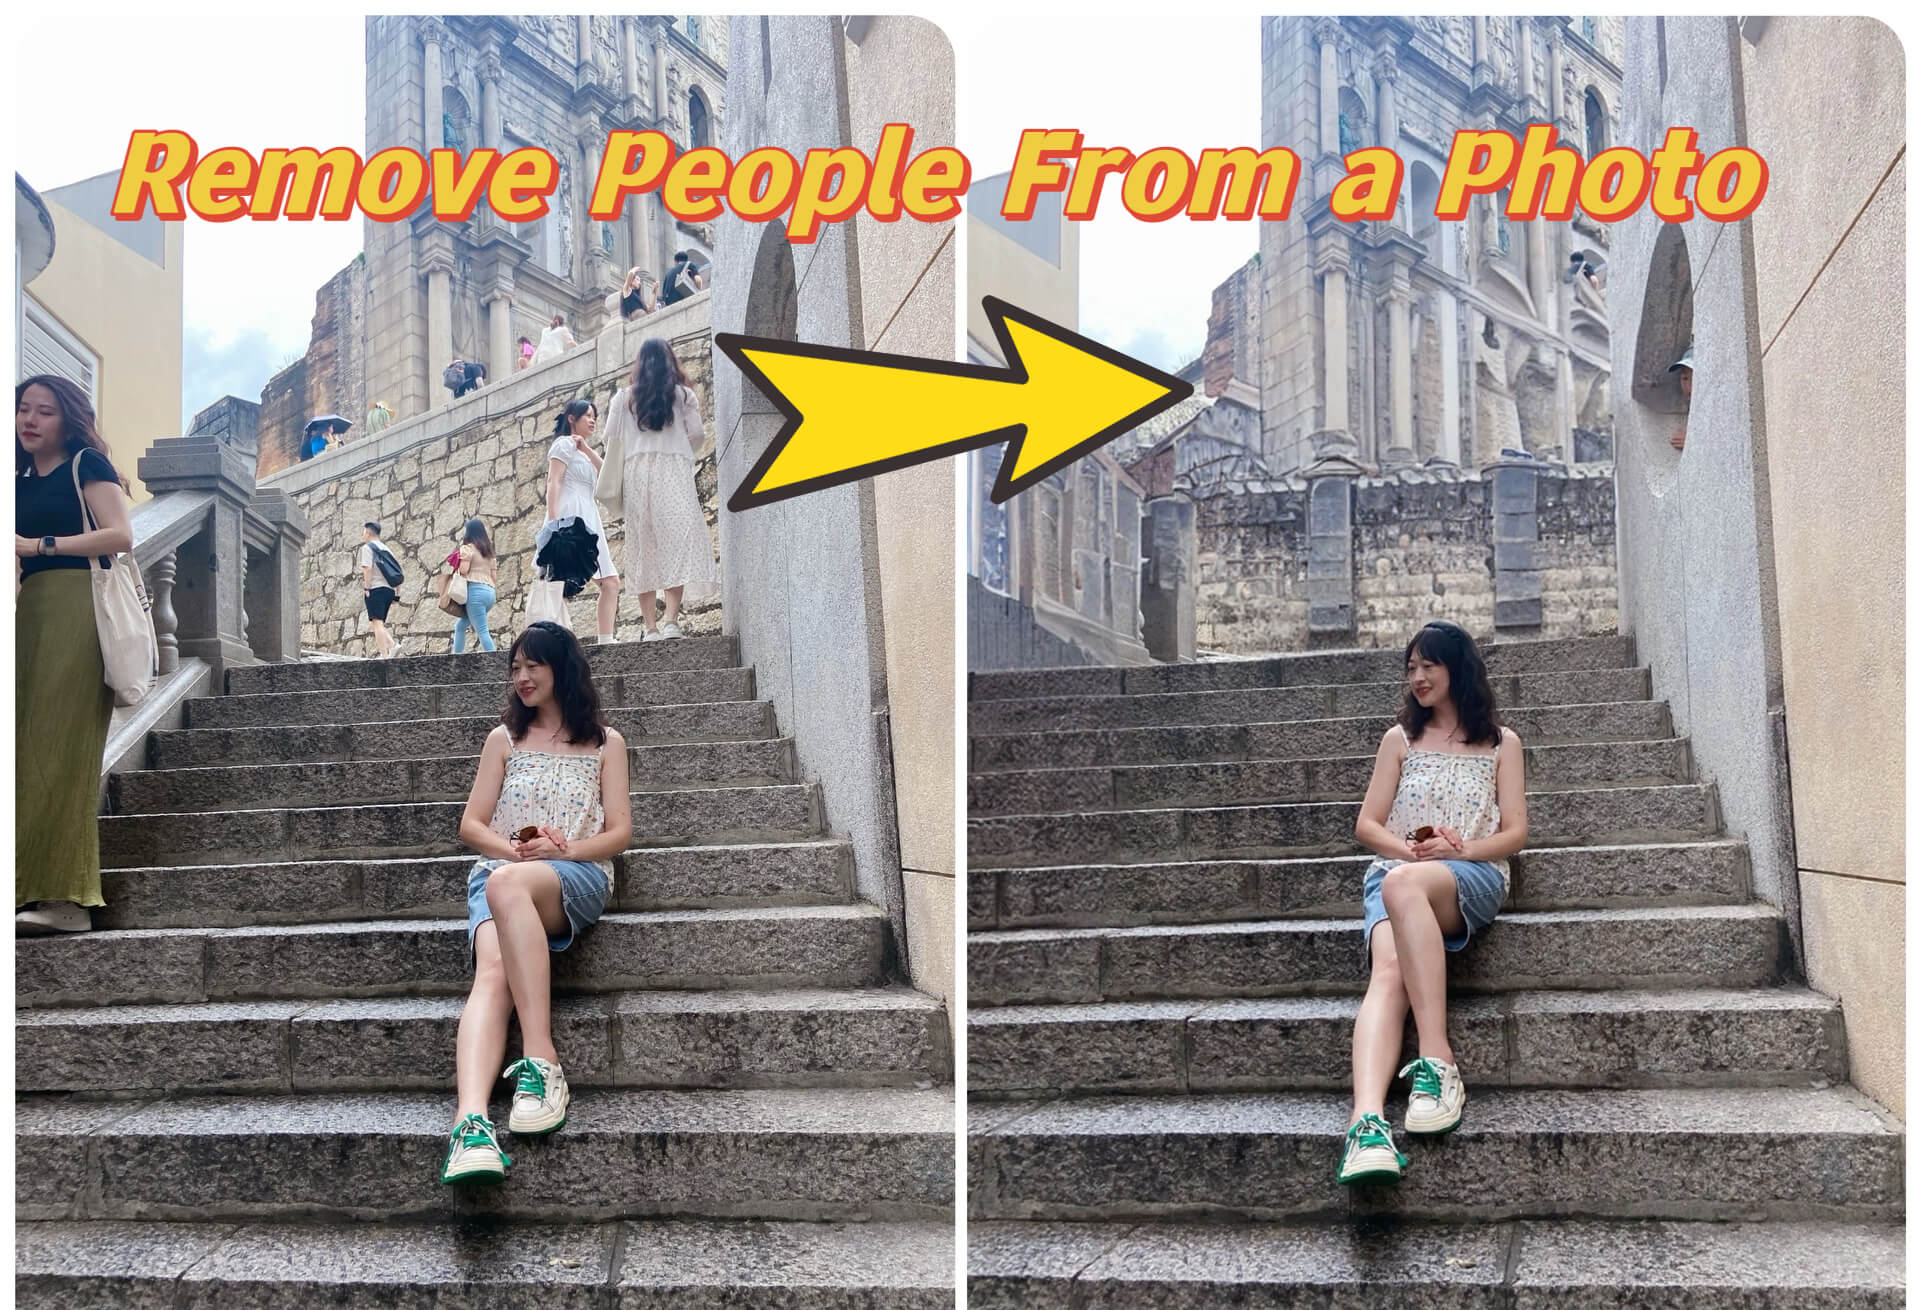 Tutorial on digitally removing people from a photo for a cleaner image.